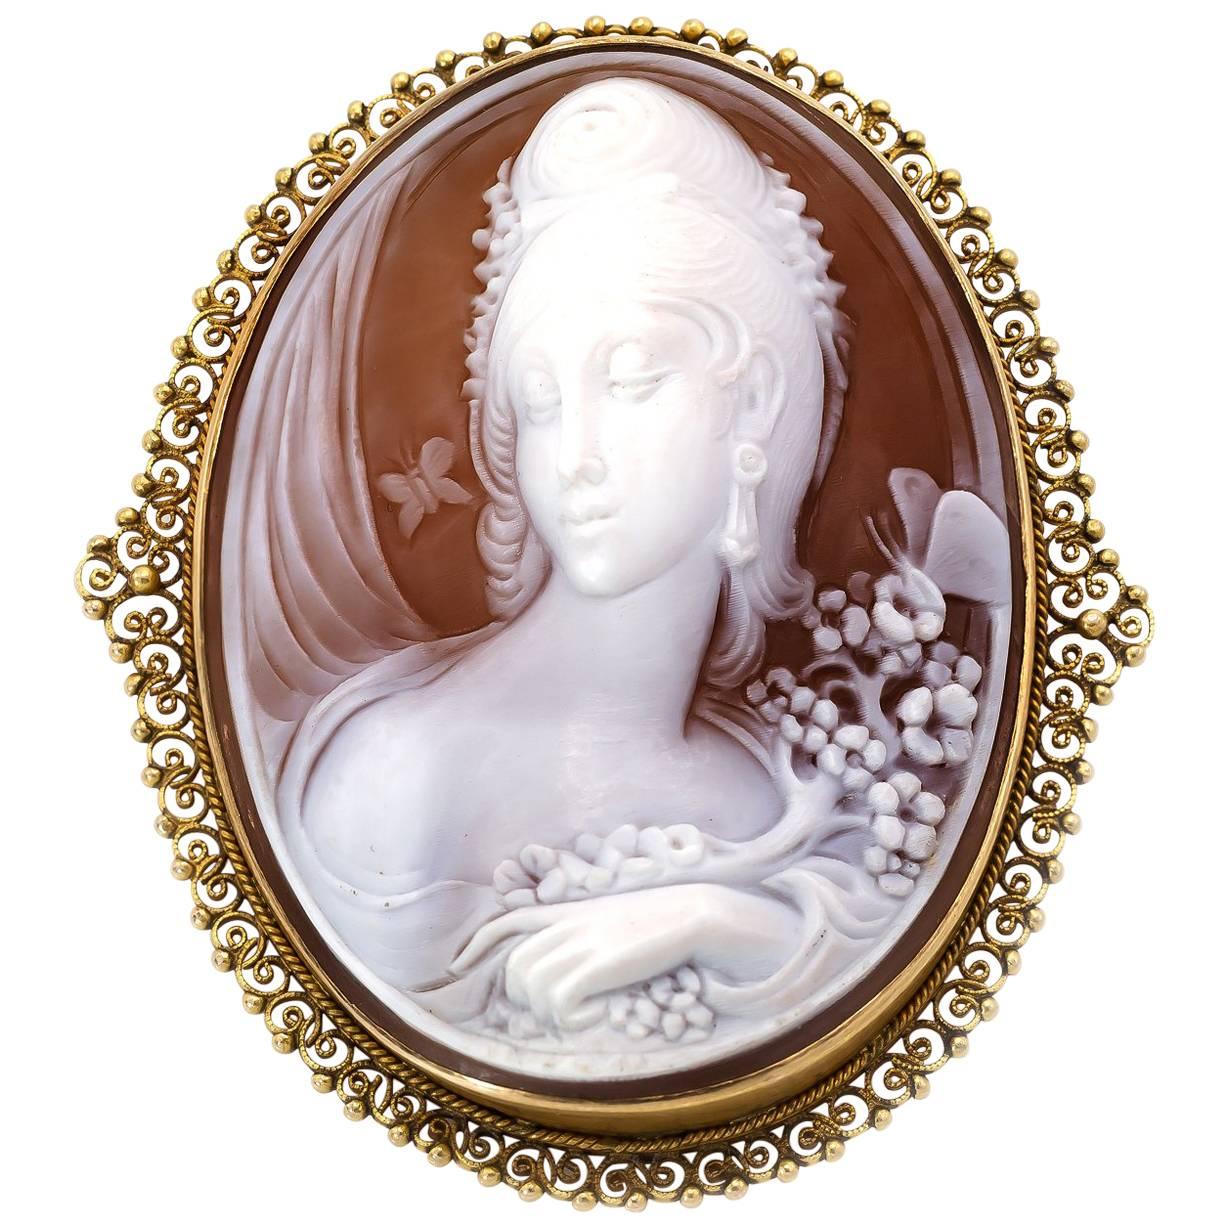 Carved Shell Cameo 14KT Gold Filigree Pin Pendant Italy